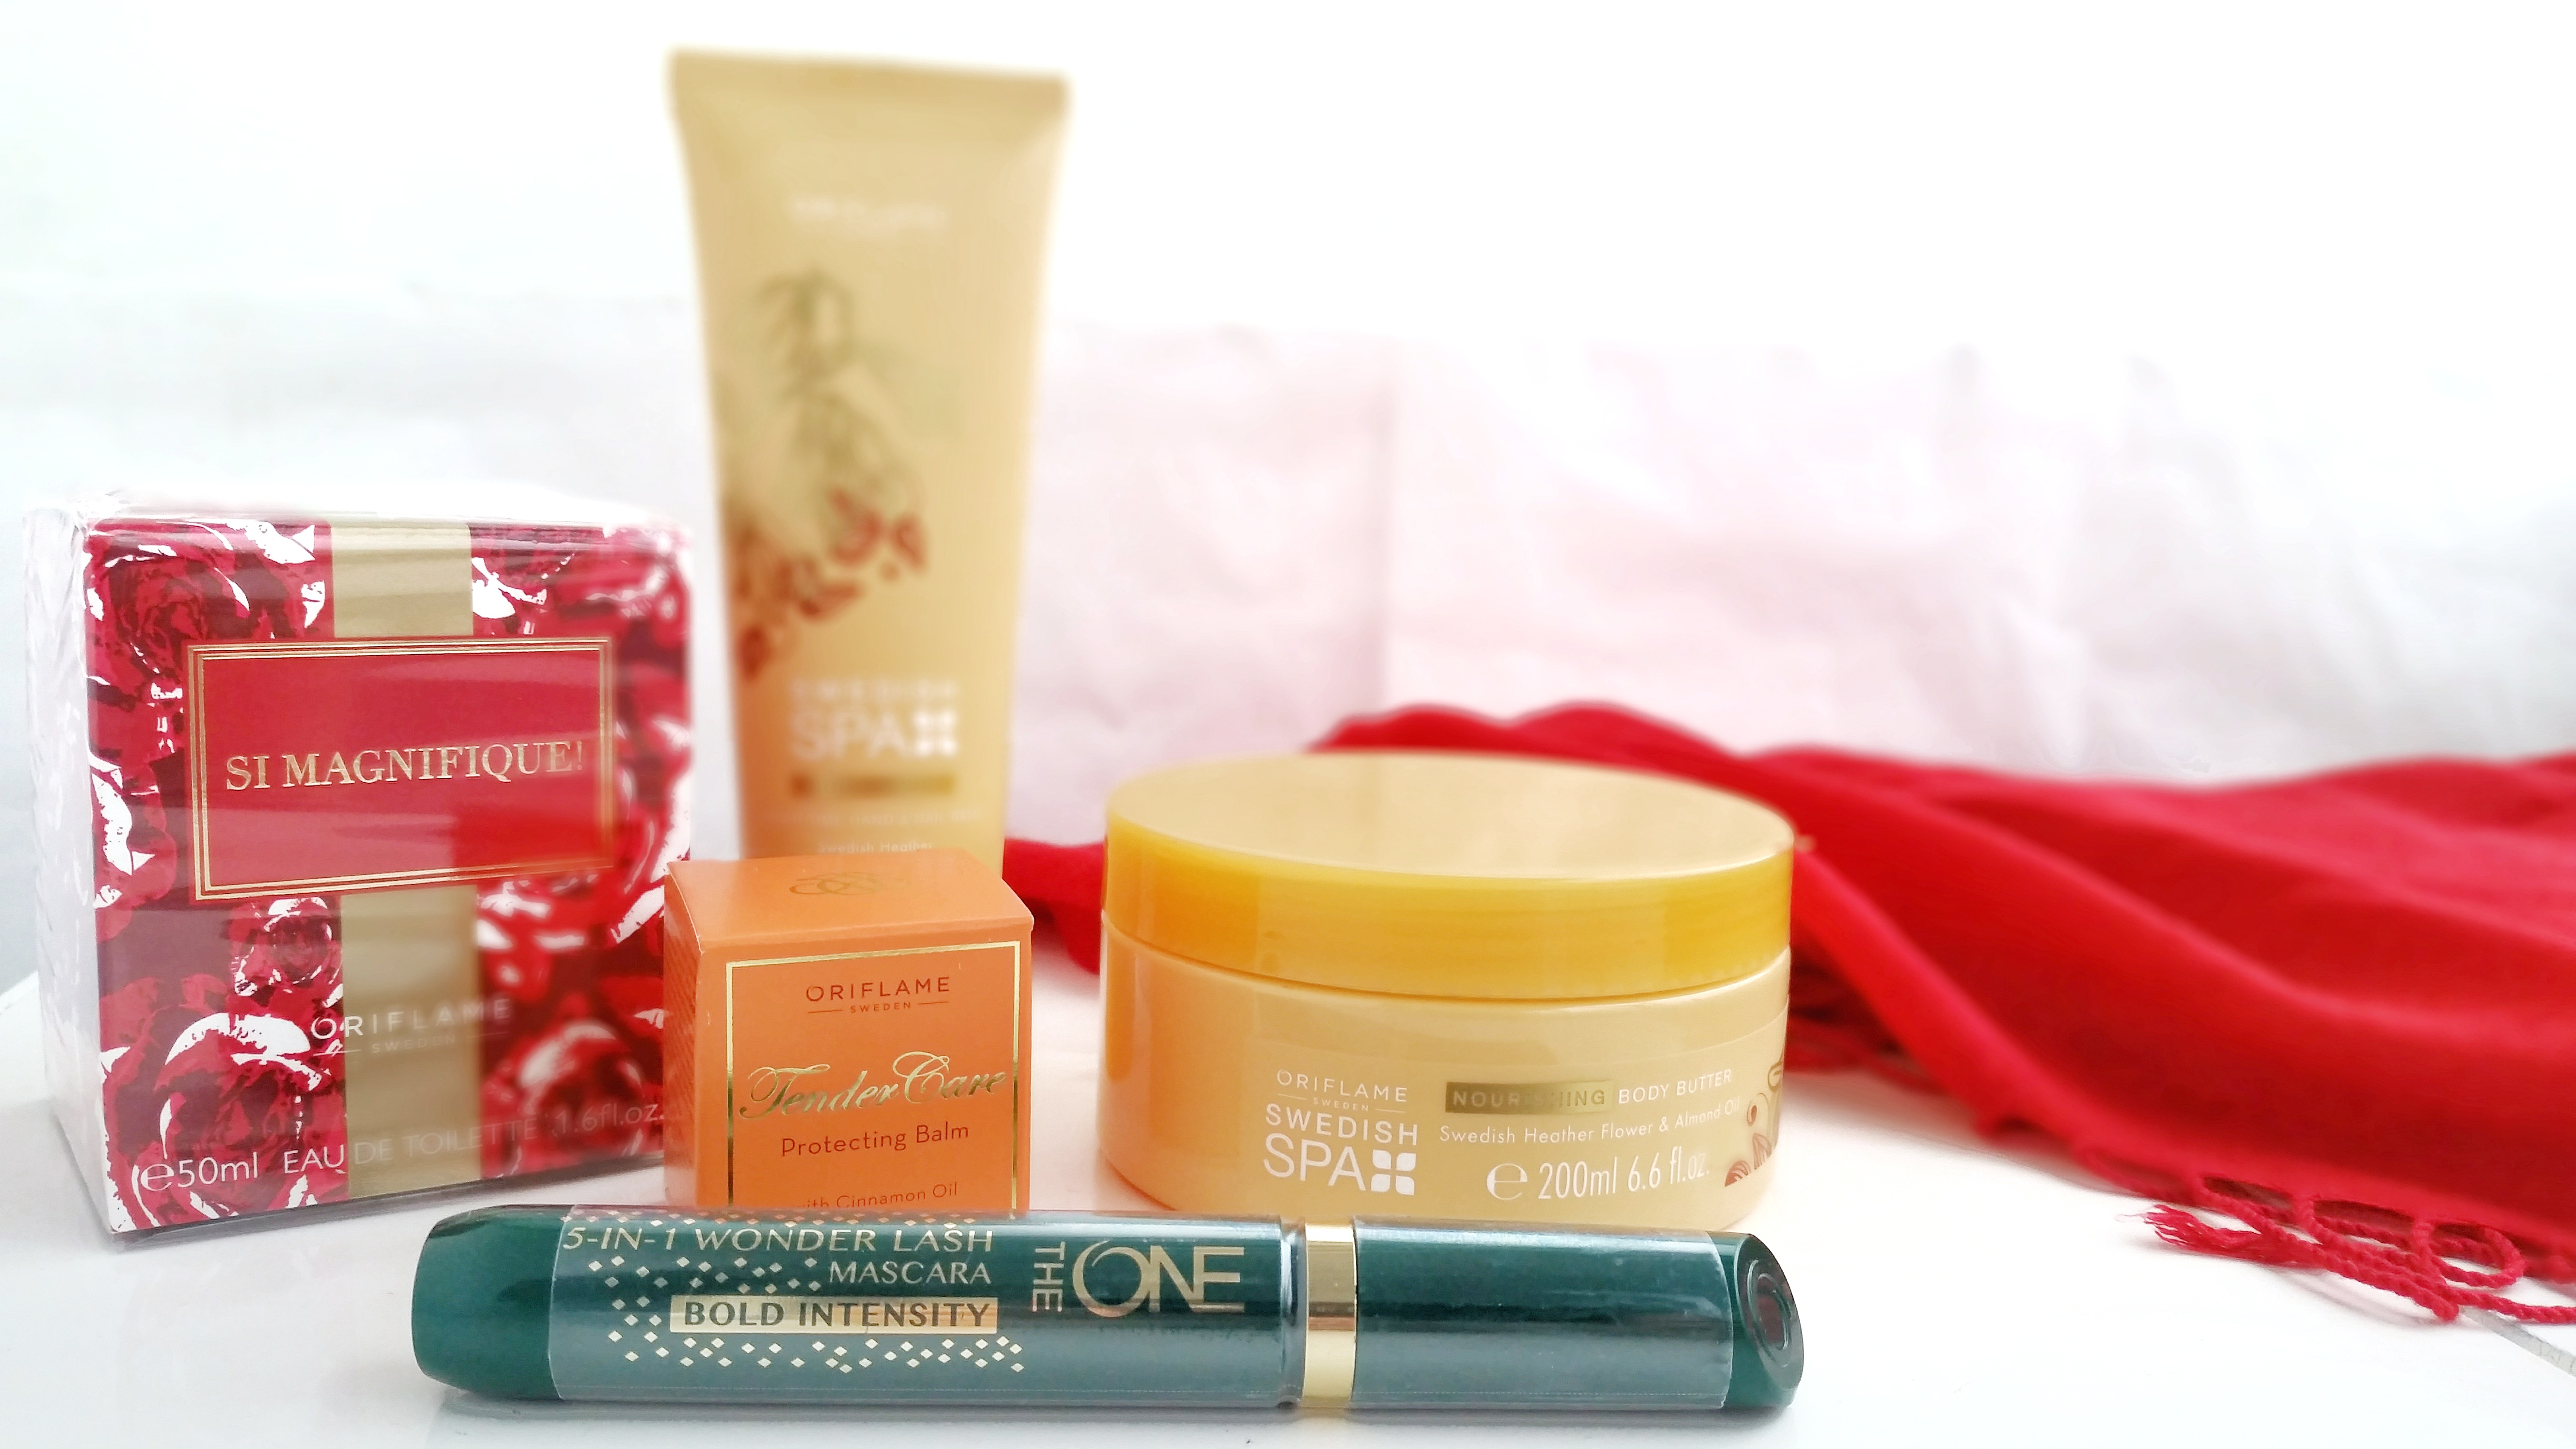 giveaway-beautyandatwist-oriflame-decembrie-2016-swedish-spa-the-one-si-magnifique